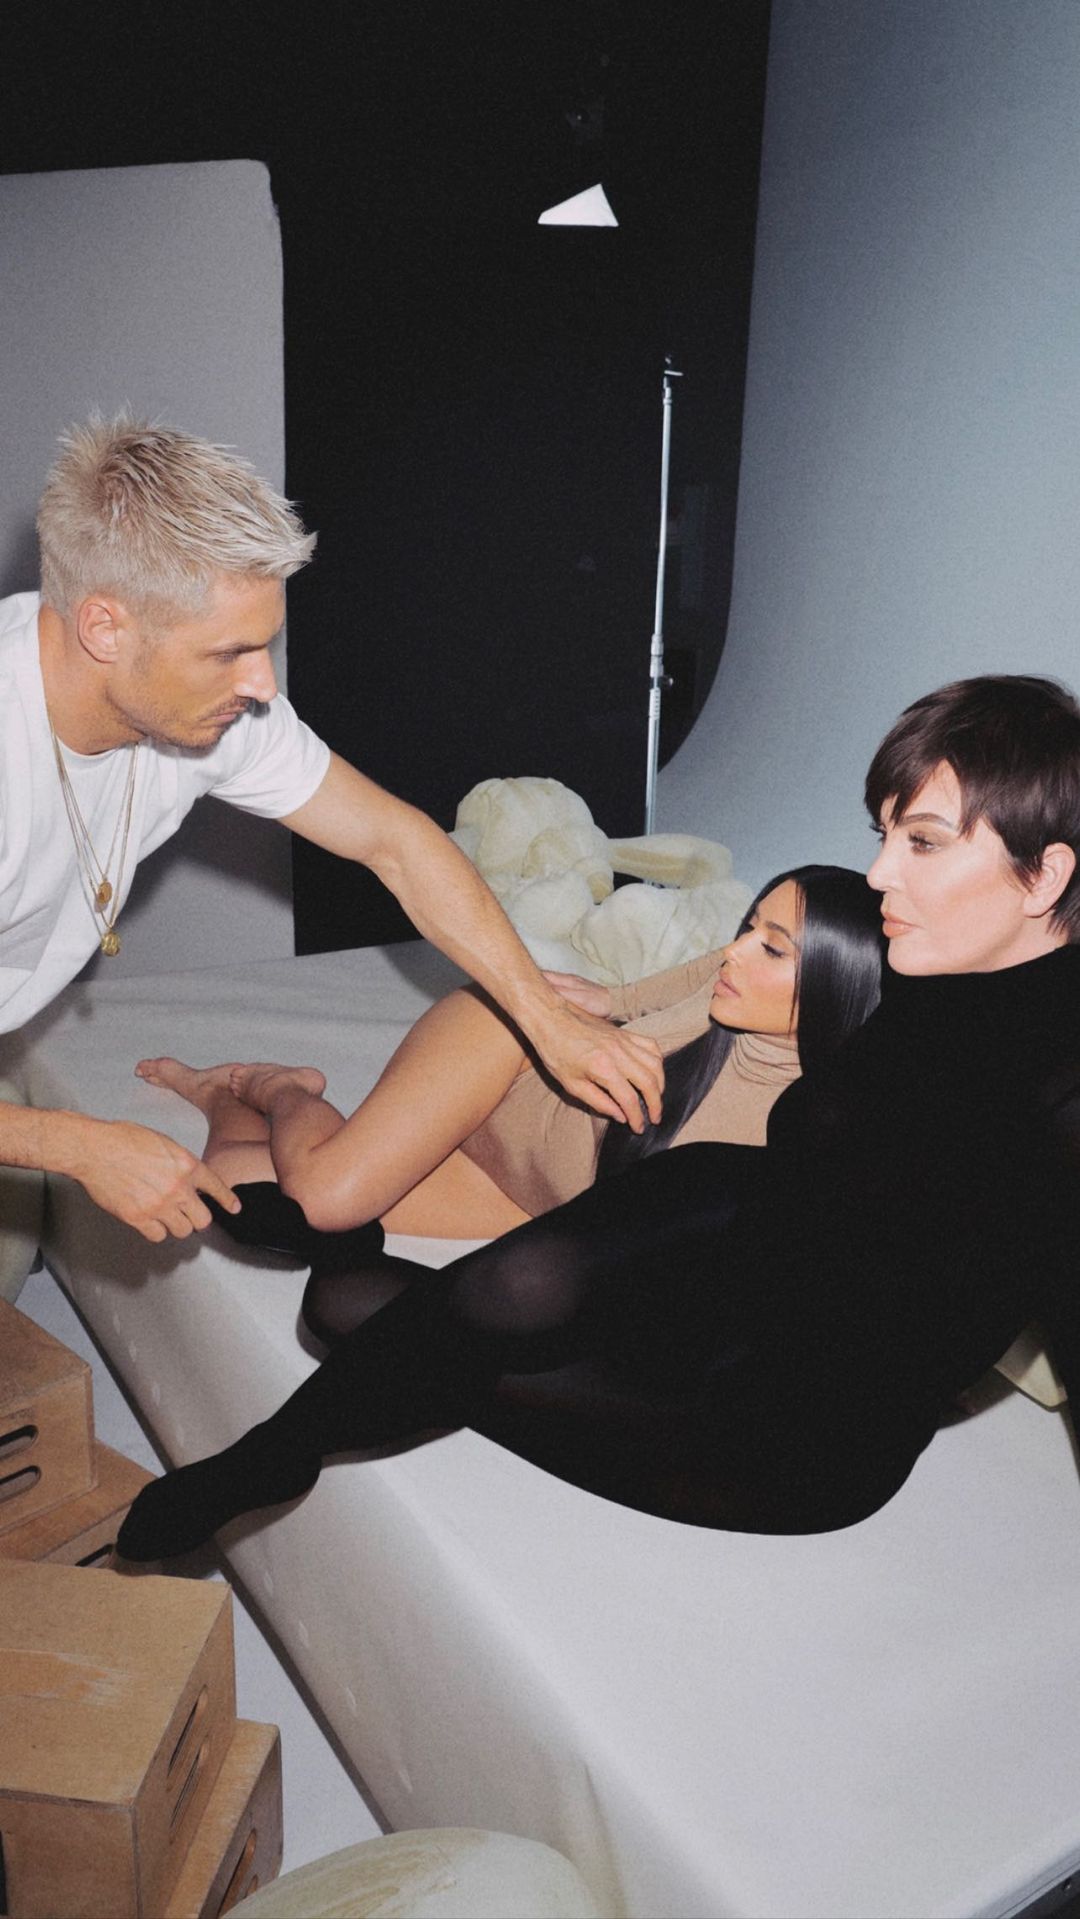 dan trowell recommends Kris Jenner Nude Photo